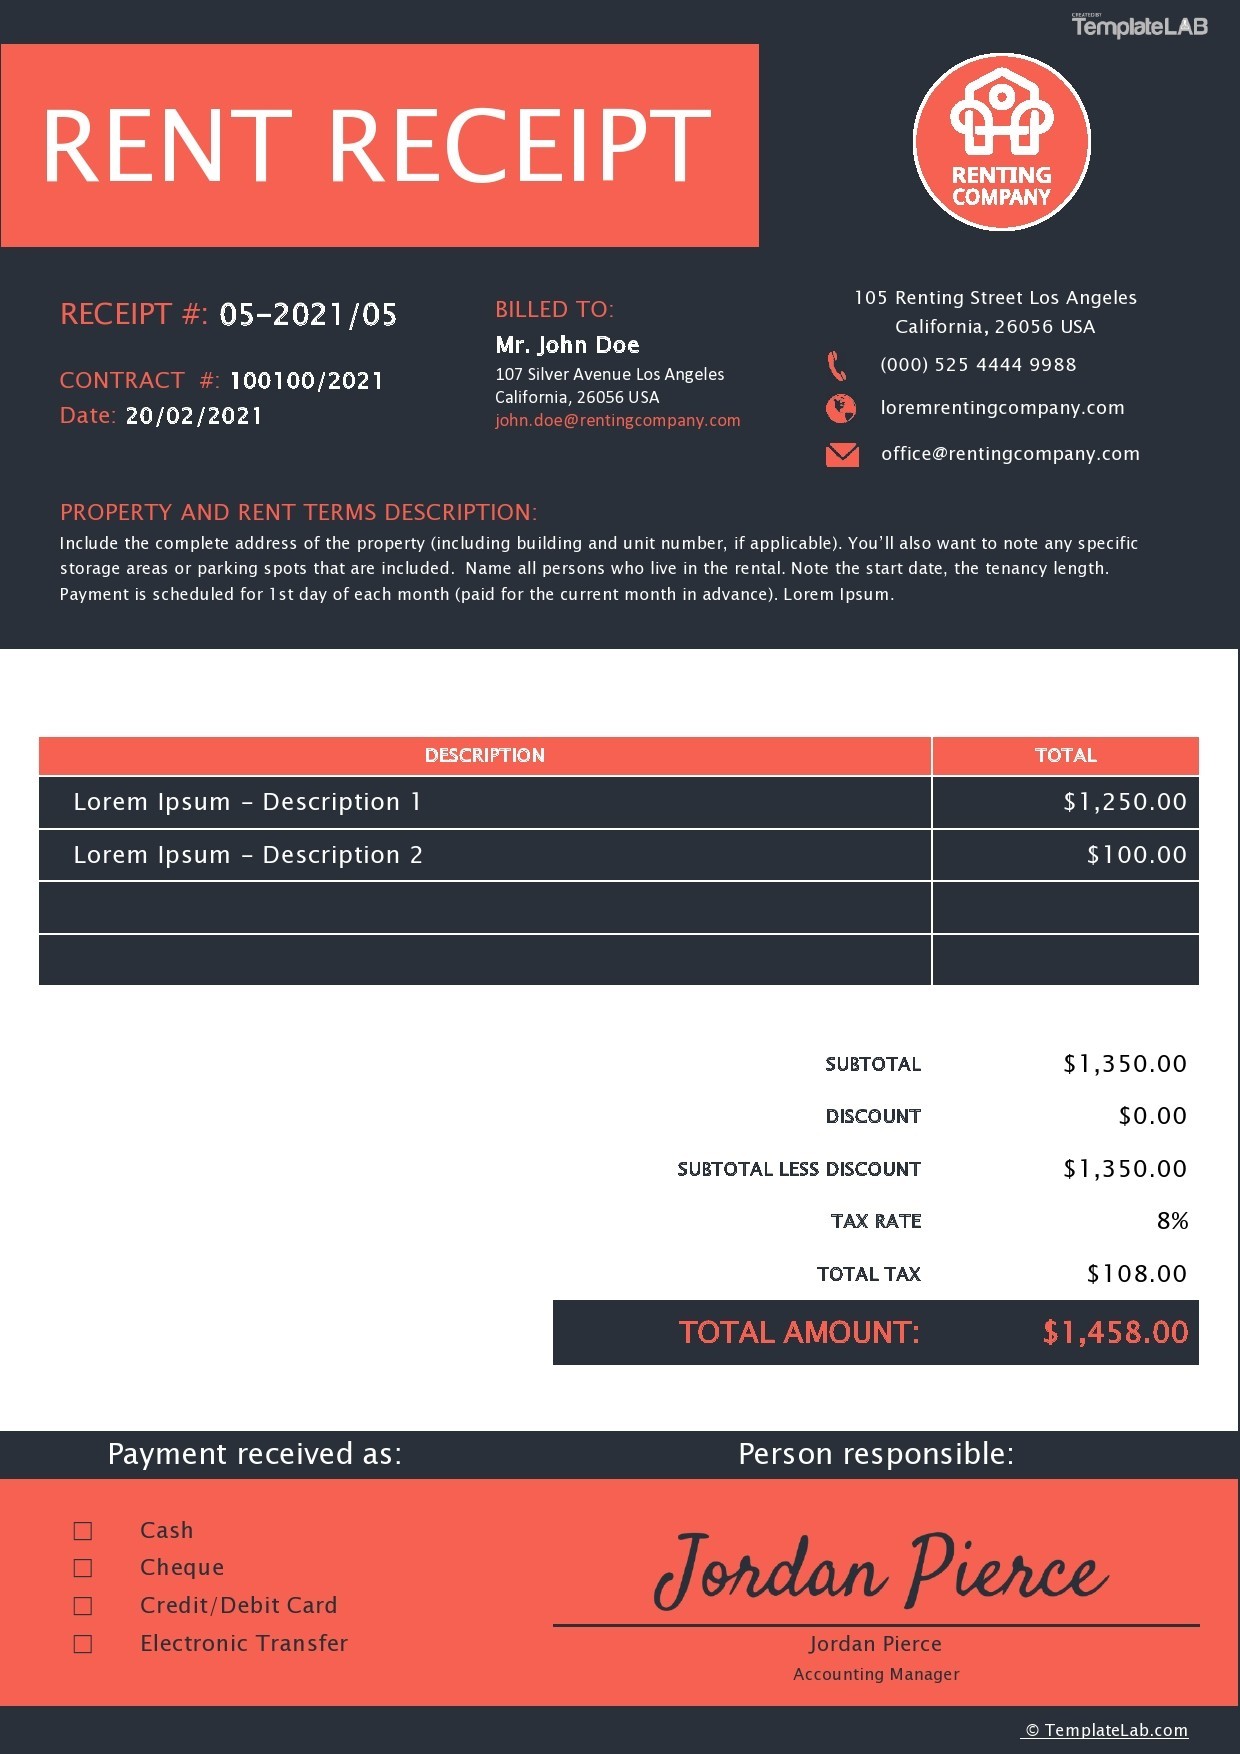 receipt-templates-expensefast-pin-by-kpcuts-on-receipts-receipt-template-lowes-home-receipts